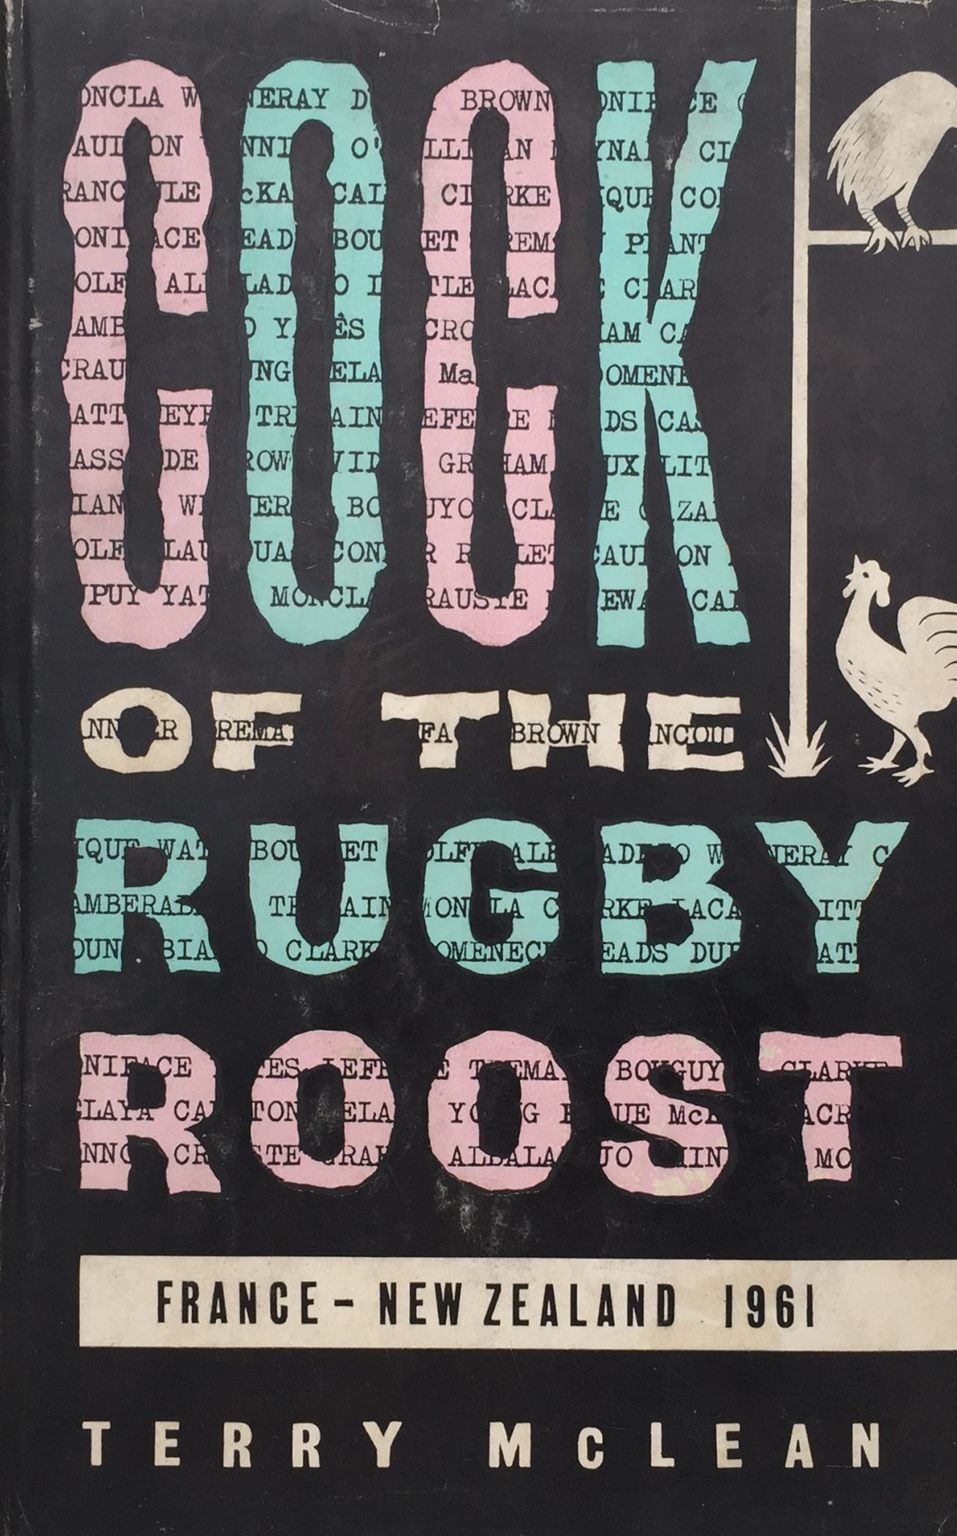 COCK OF THE RUGBY ROOST